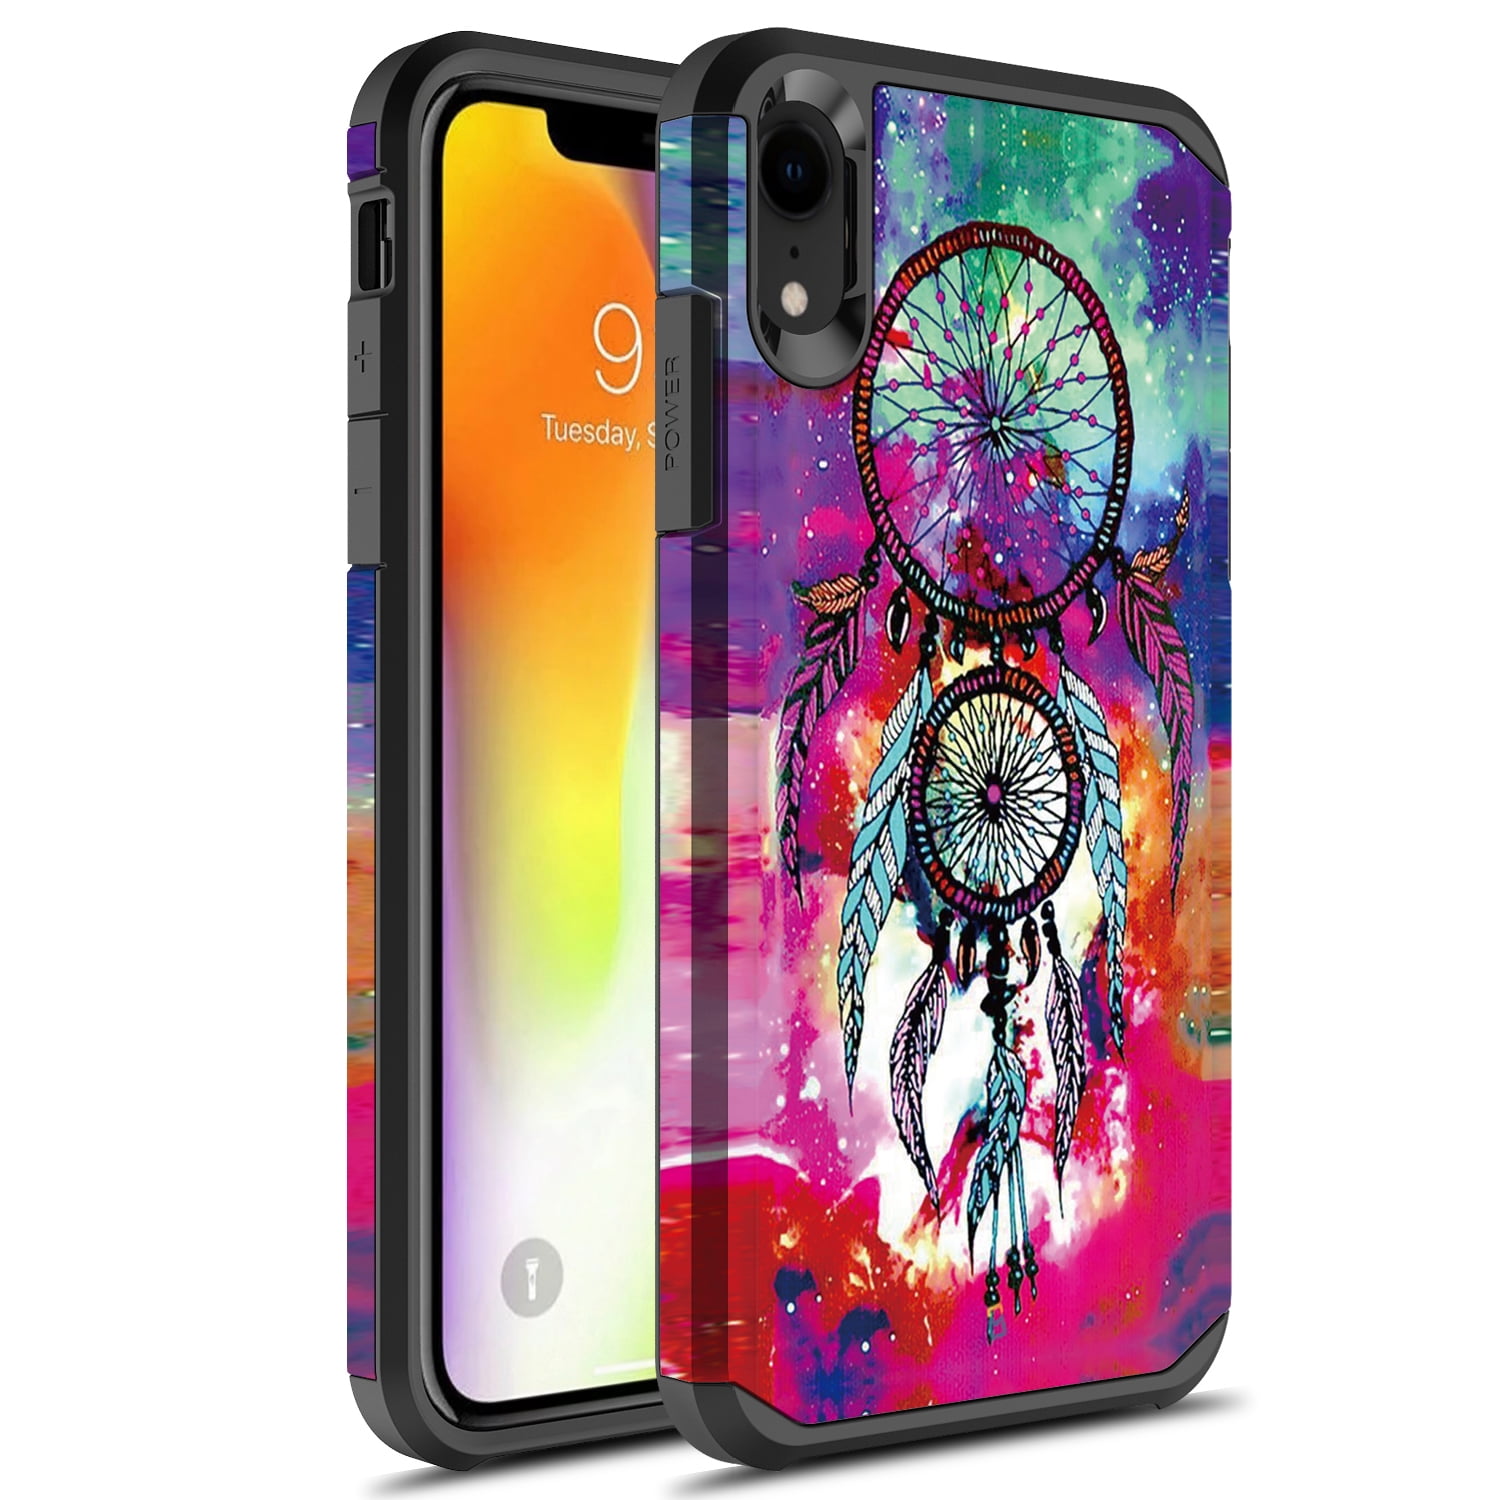 iPhone XR Case, Rosebono Slim Hybrid Dual Layer Graphic Fashion Colorful Cover Armor Case for Apple iPhone XR (Dream Catcher)